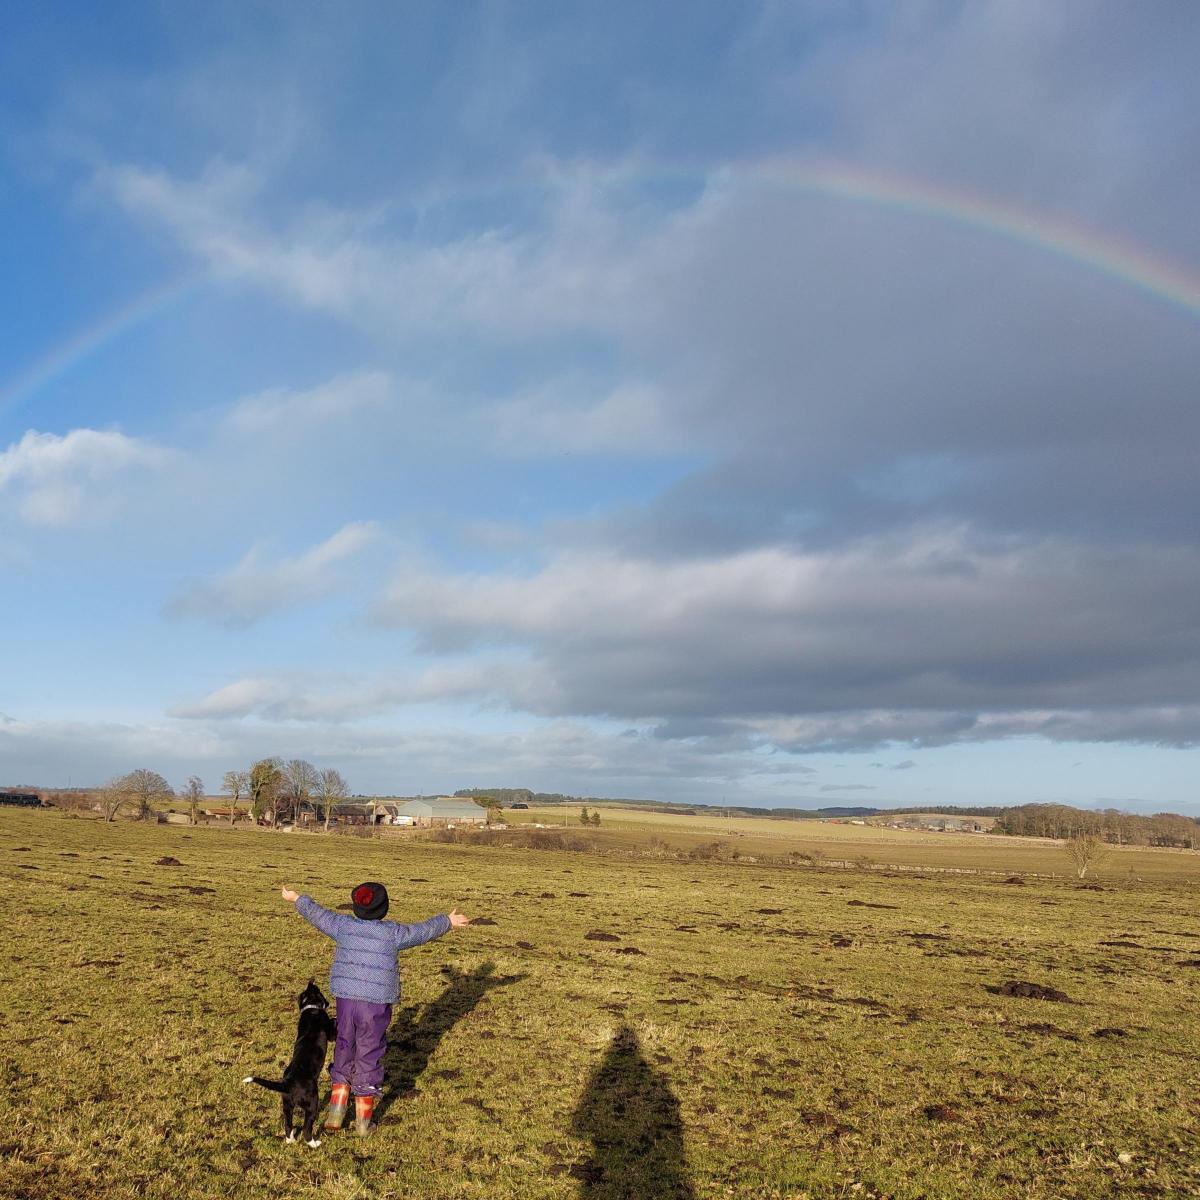 Nicola Youngson - Lucy Youngson aged 4 and her dog Meg admiring the rainbow at Westerton, Echt, Aberdeenshire